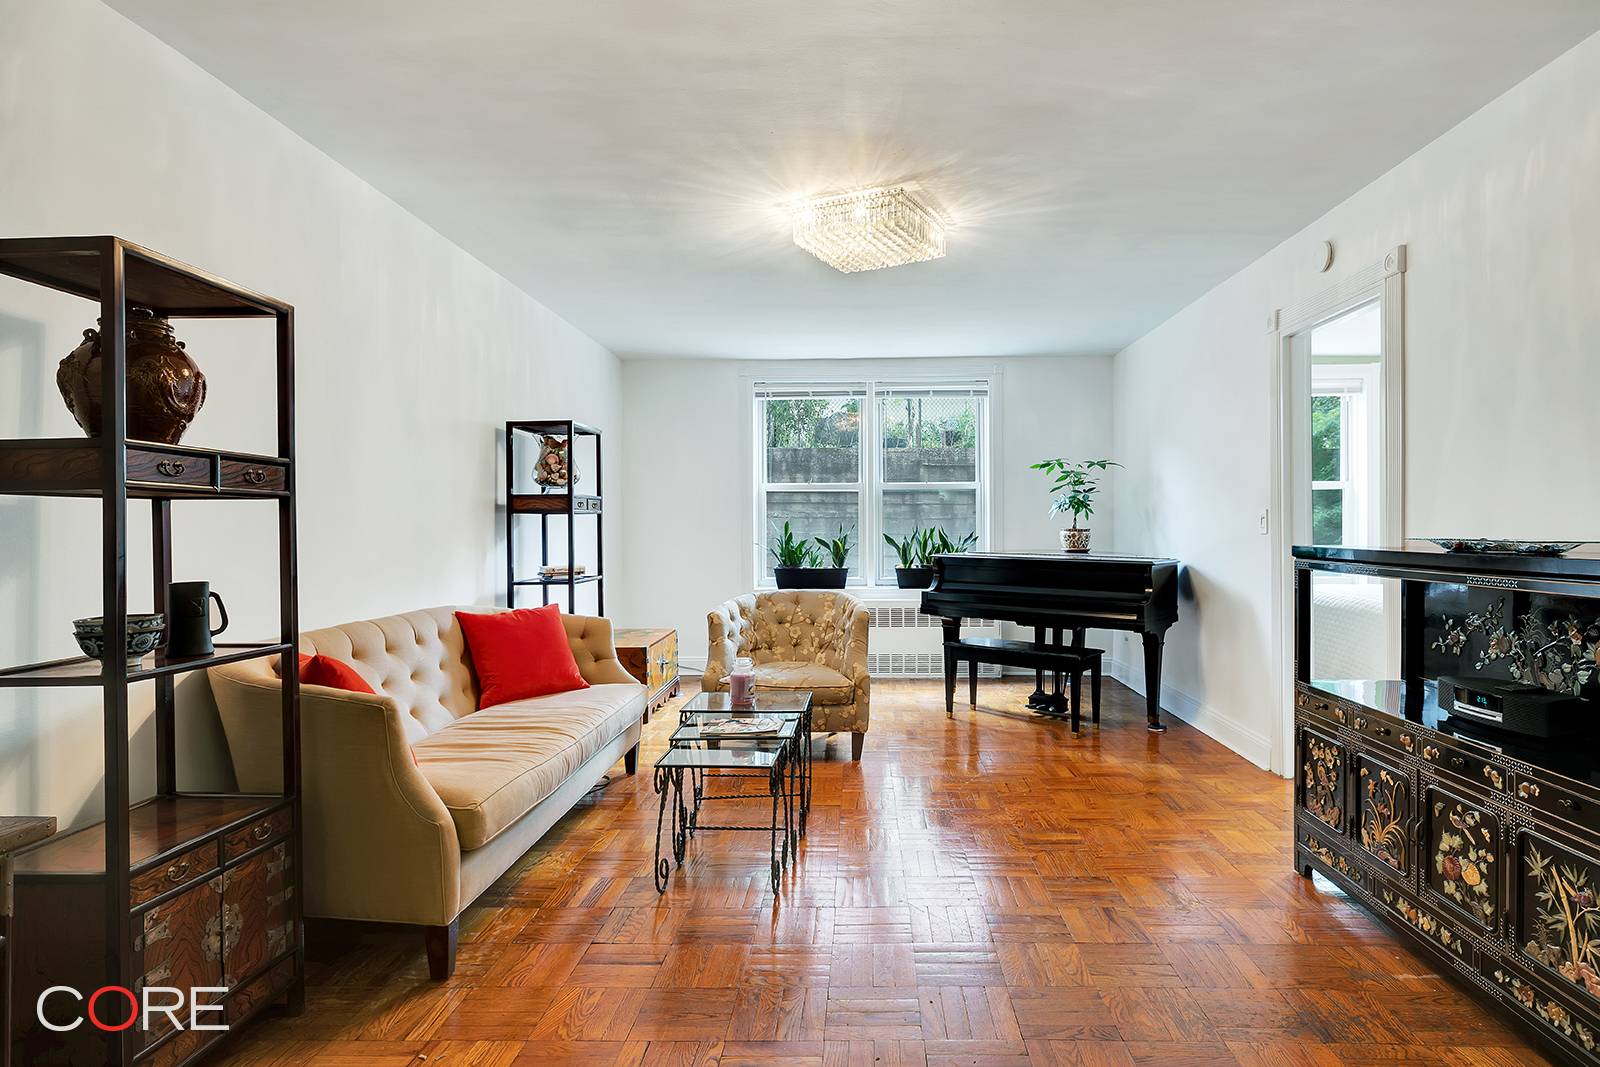 This pin drop quiet true two bedroom, one bathroom, large corner unit on a beautiful tree lined street is located less than a block from Prospect Park.